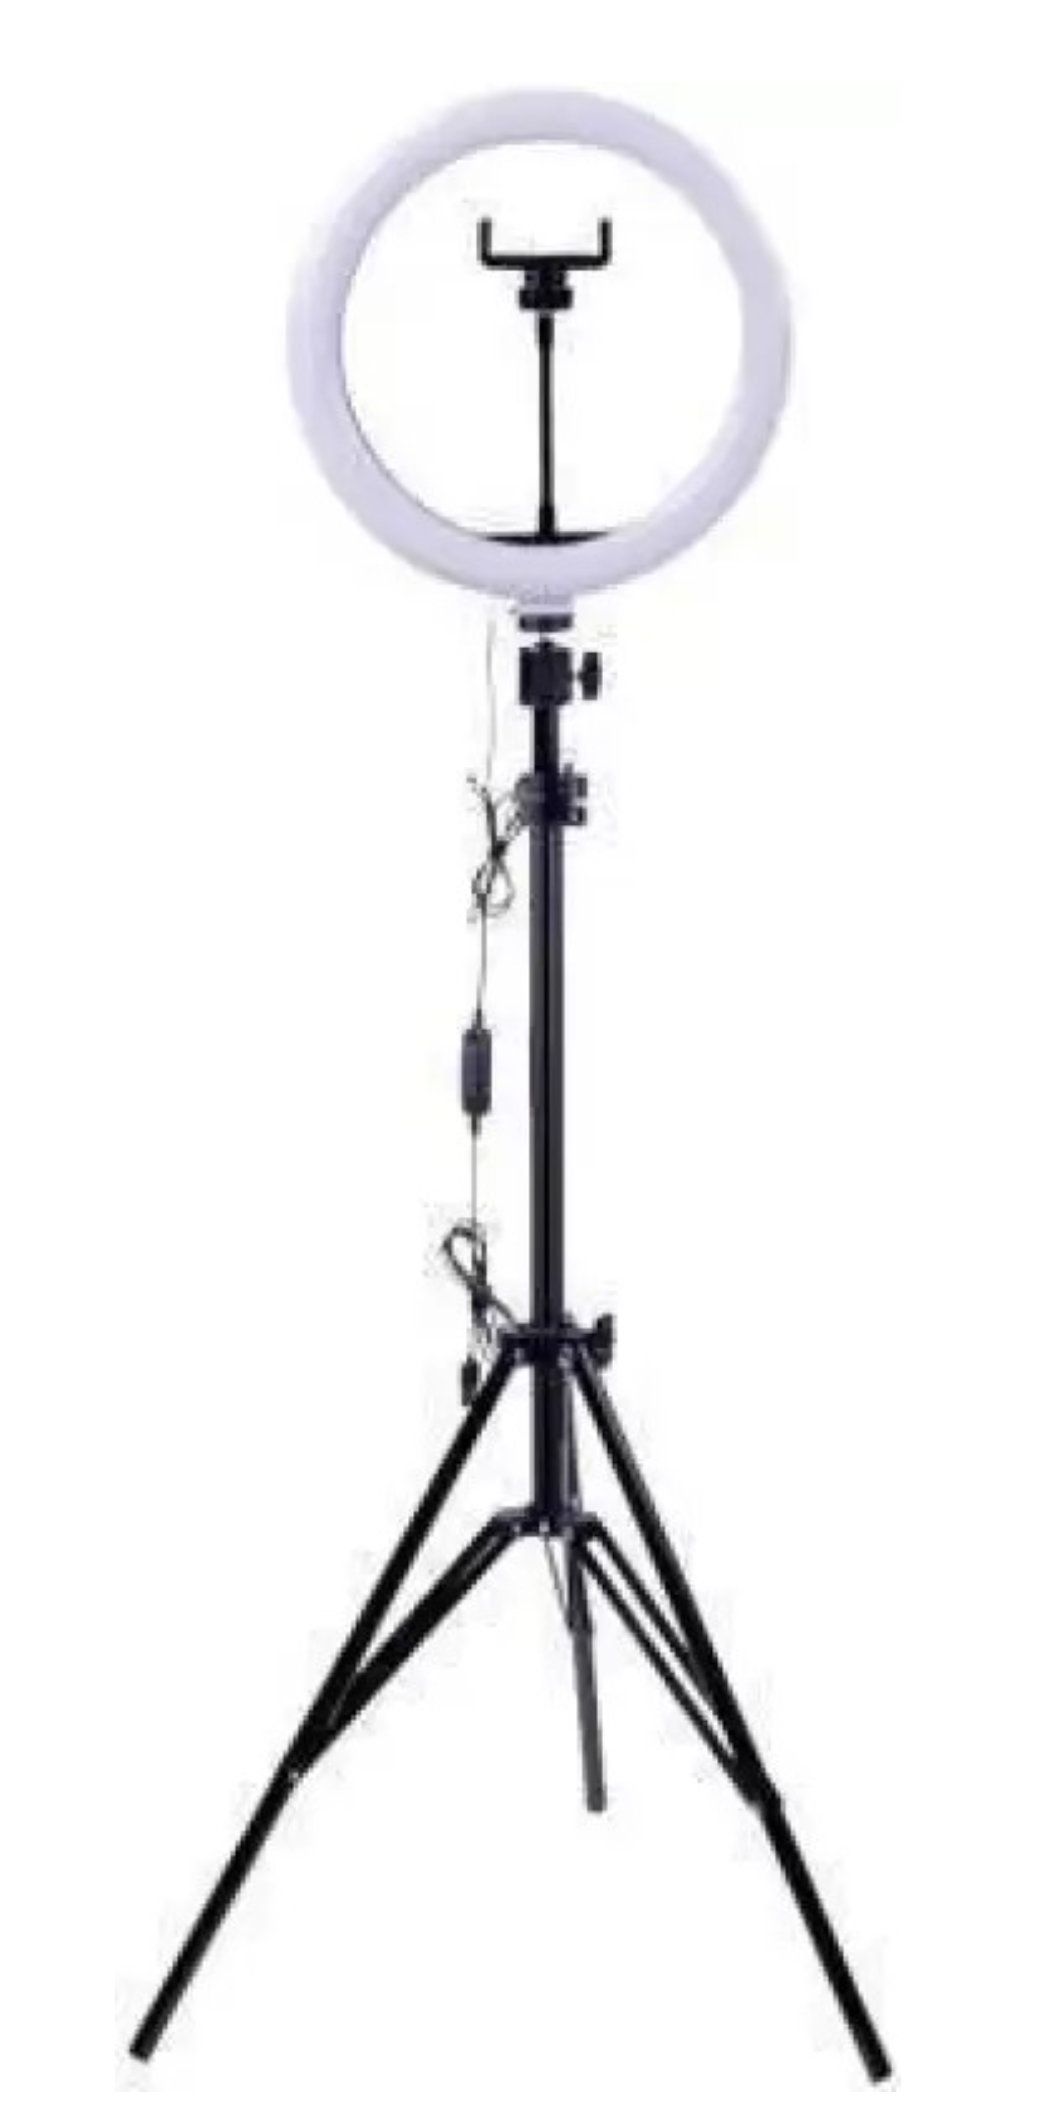 Buy Gocio 10Inch Premium Big Led Ringlight Mobile Holder with 3 Color Modes  Dimmable with 7Ft Tripod Stand|For Tiktok YouTube Reels Photo-Shoot Video  Live Stream Makeup Videos |Lightweight |Android/iPhone Online at Low